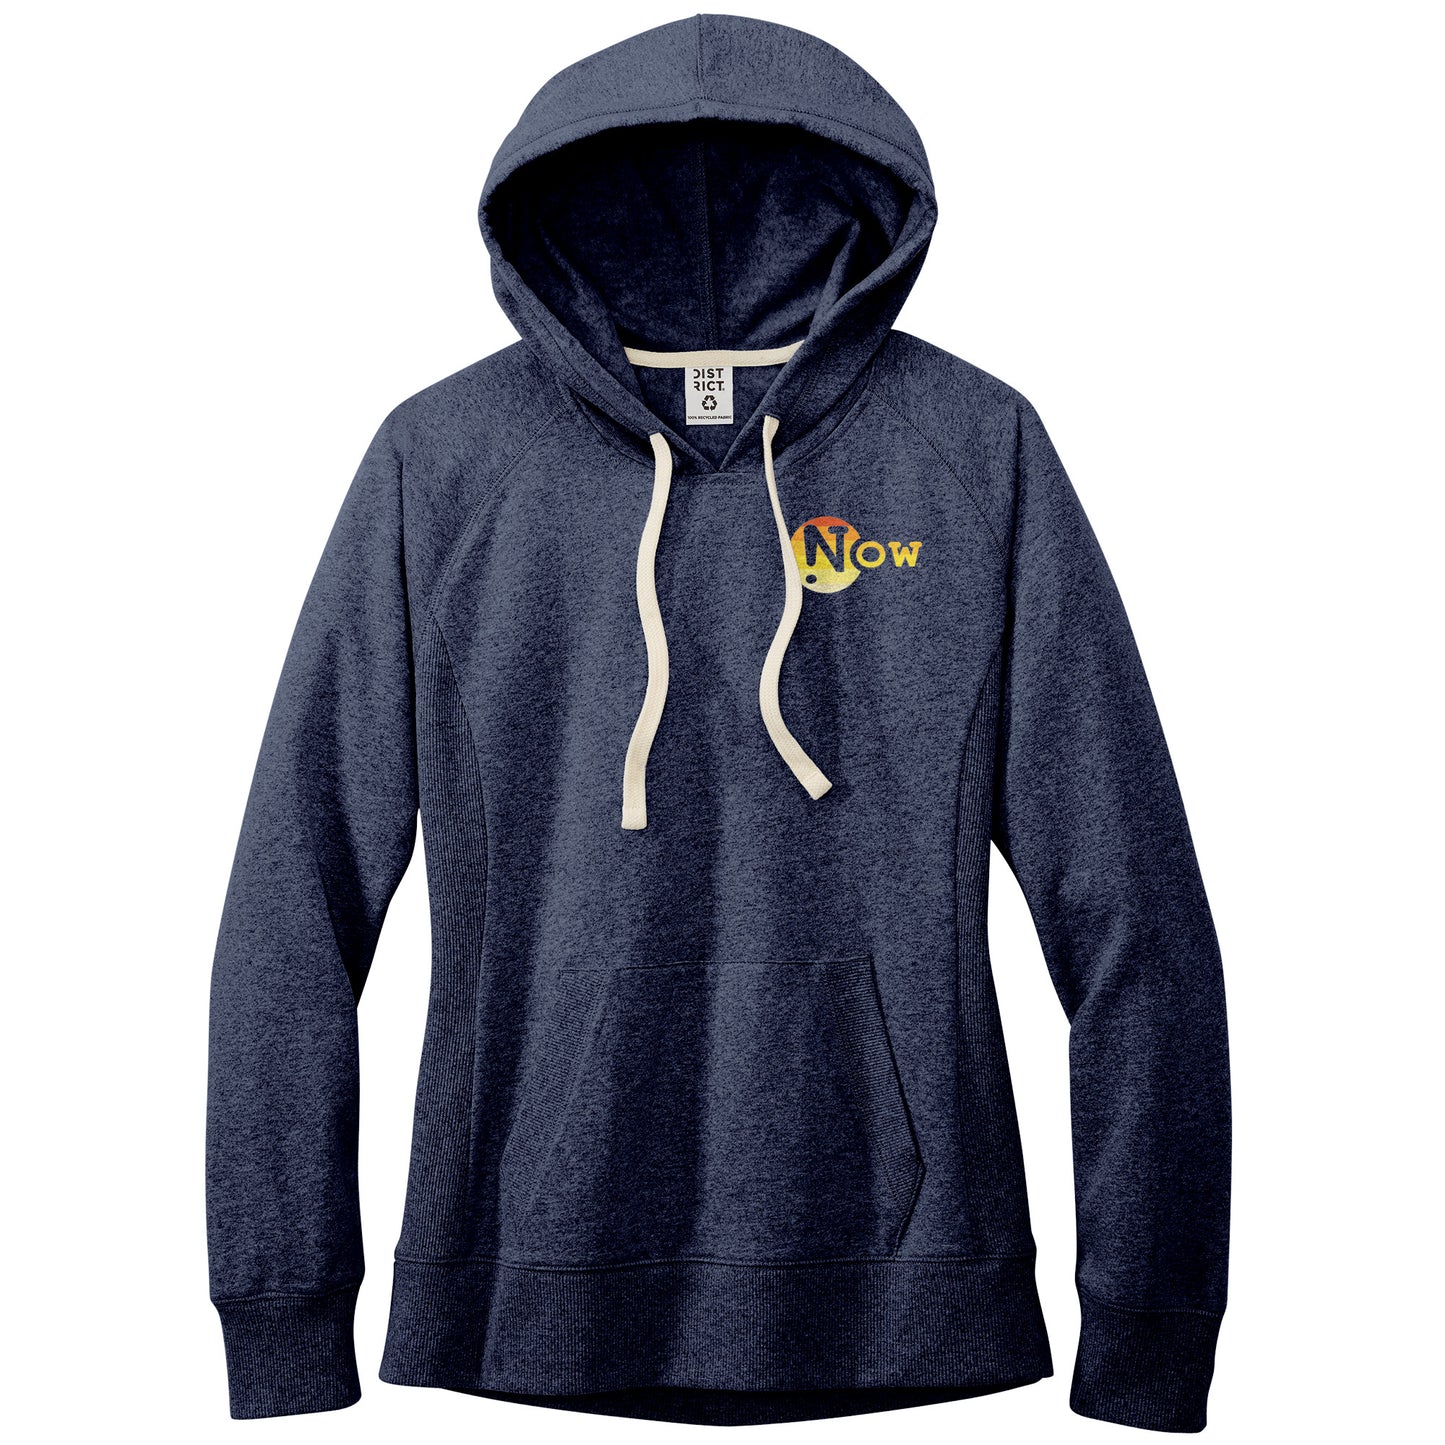 LiFE is NOW...Wherever You Are Hoodie (womens)